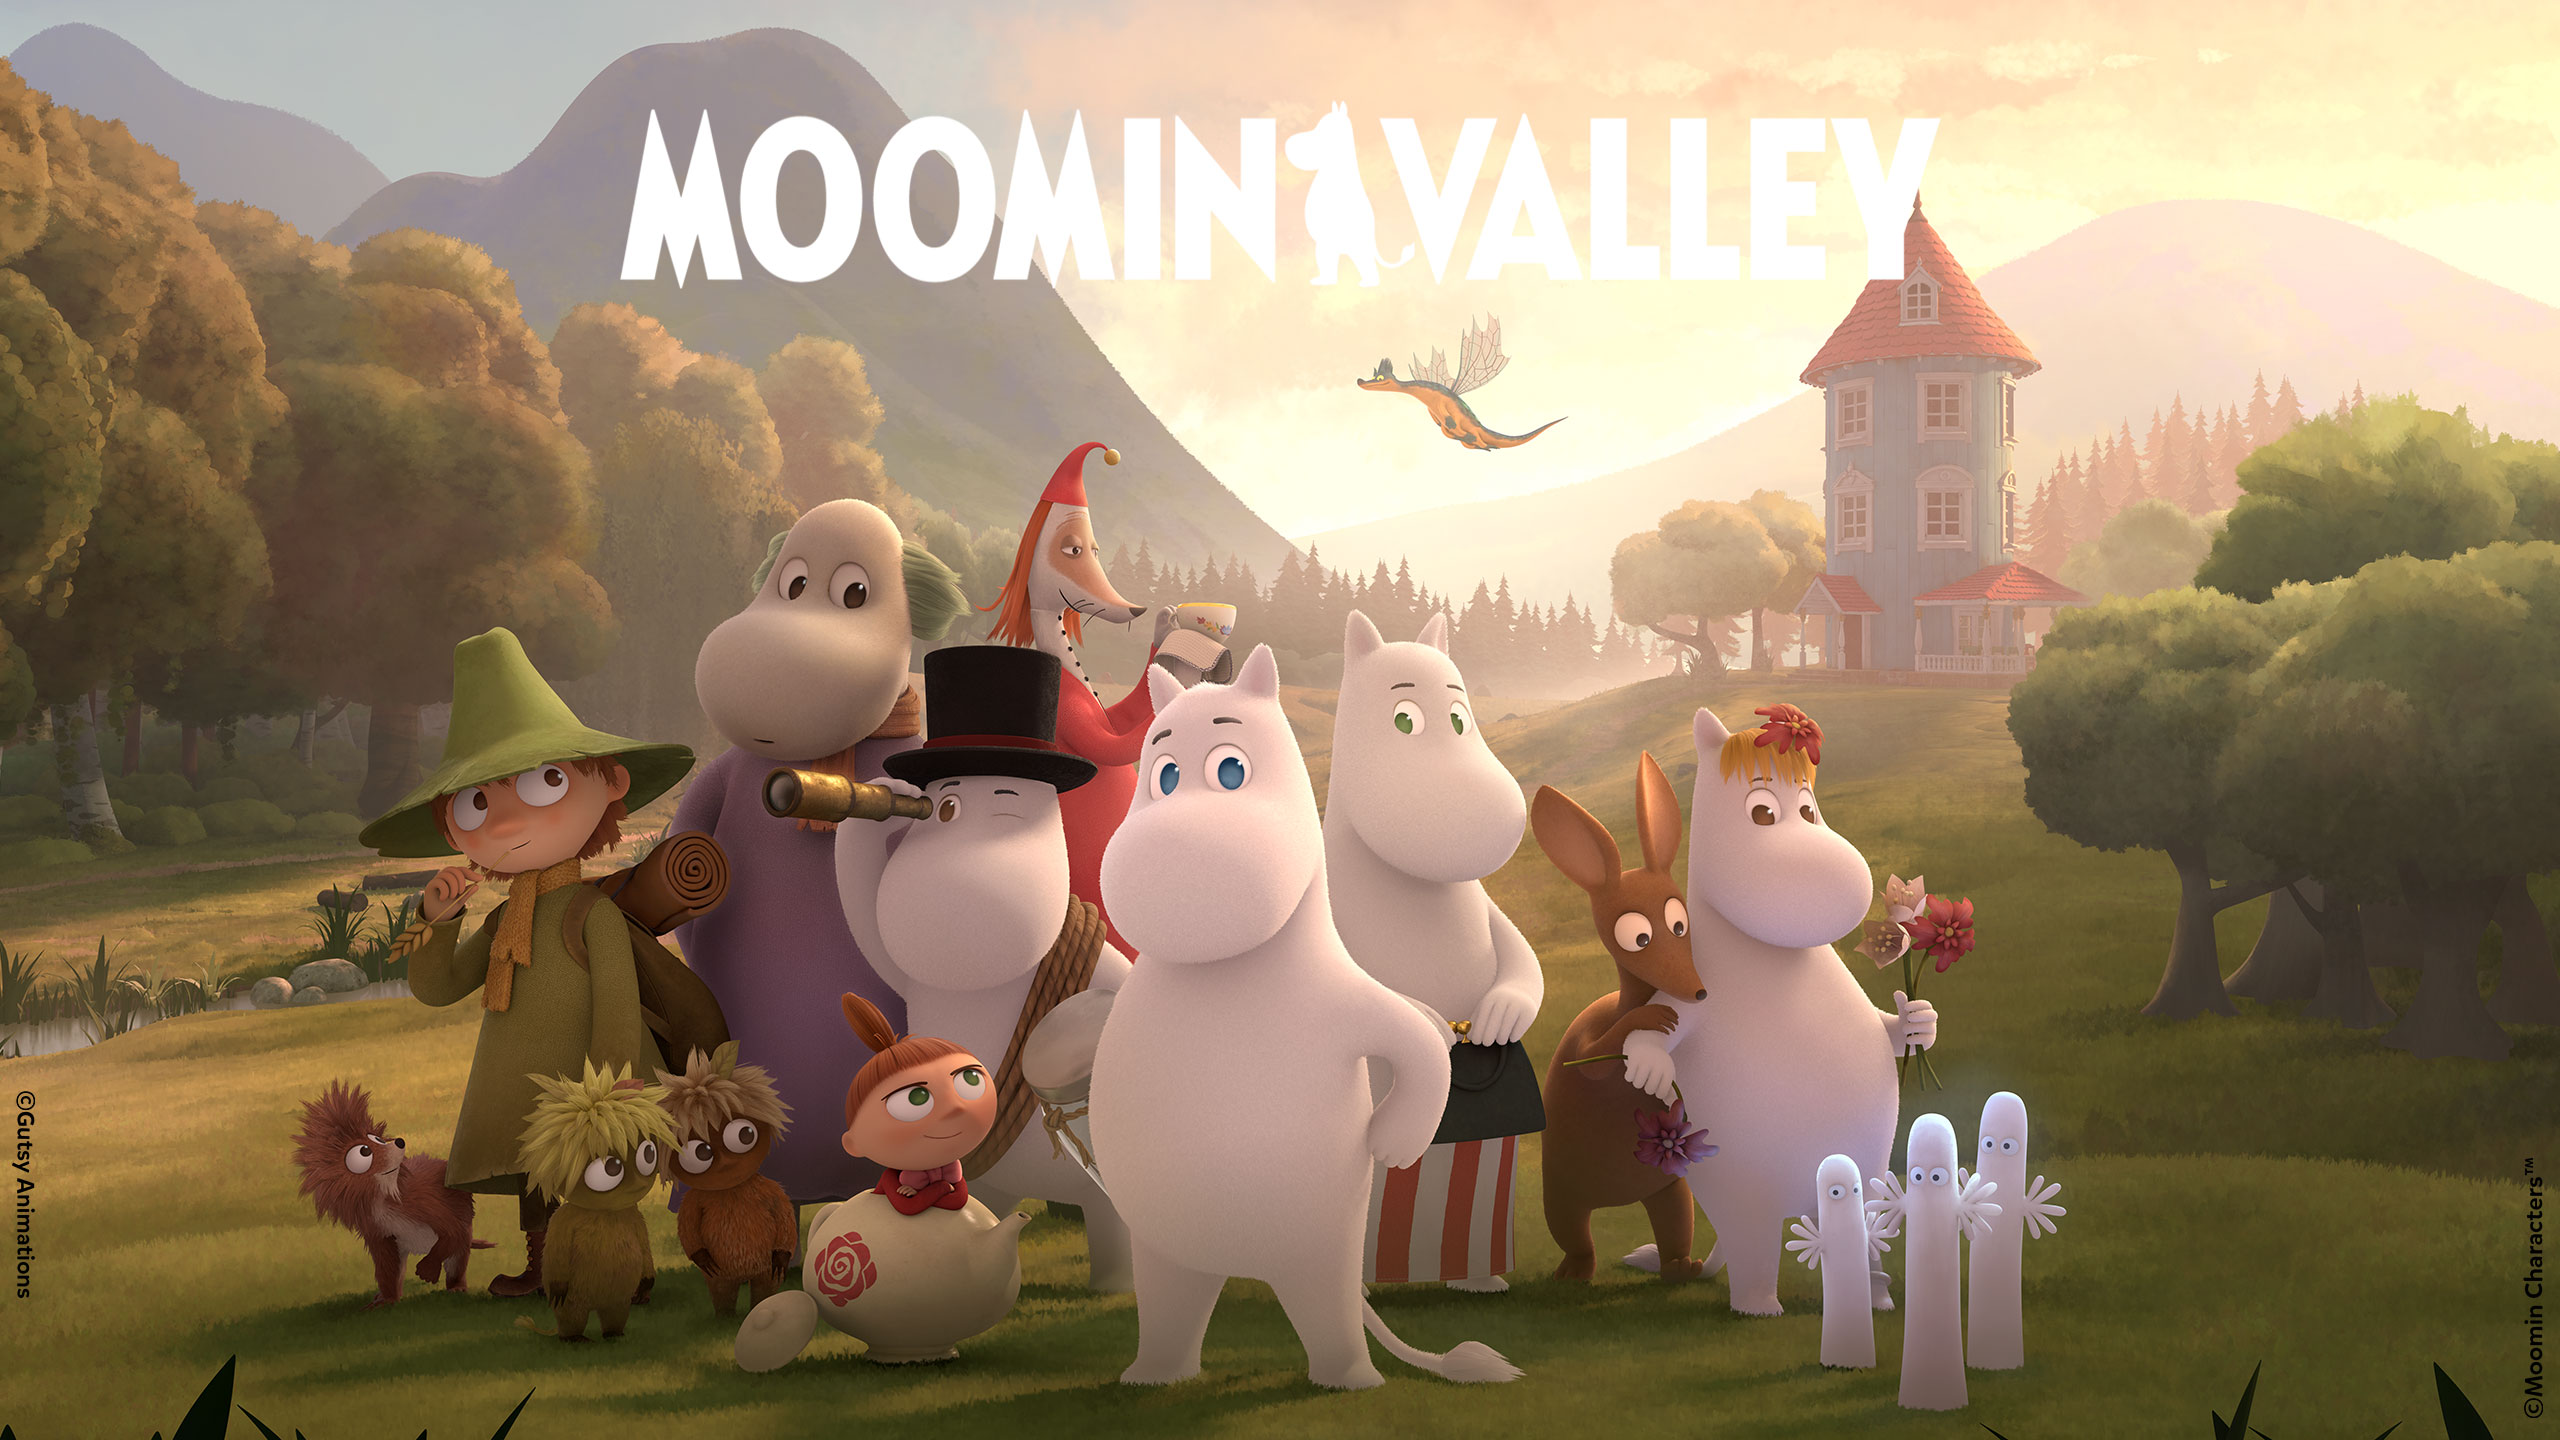 The Moominvalley TV series   download free background wallpapers